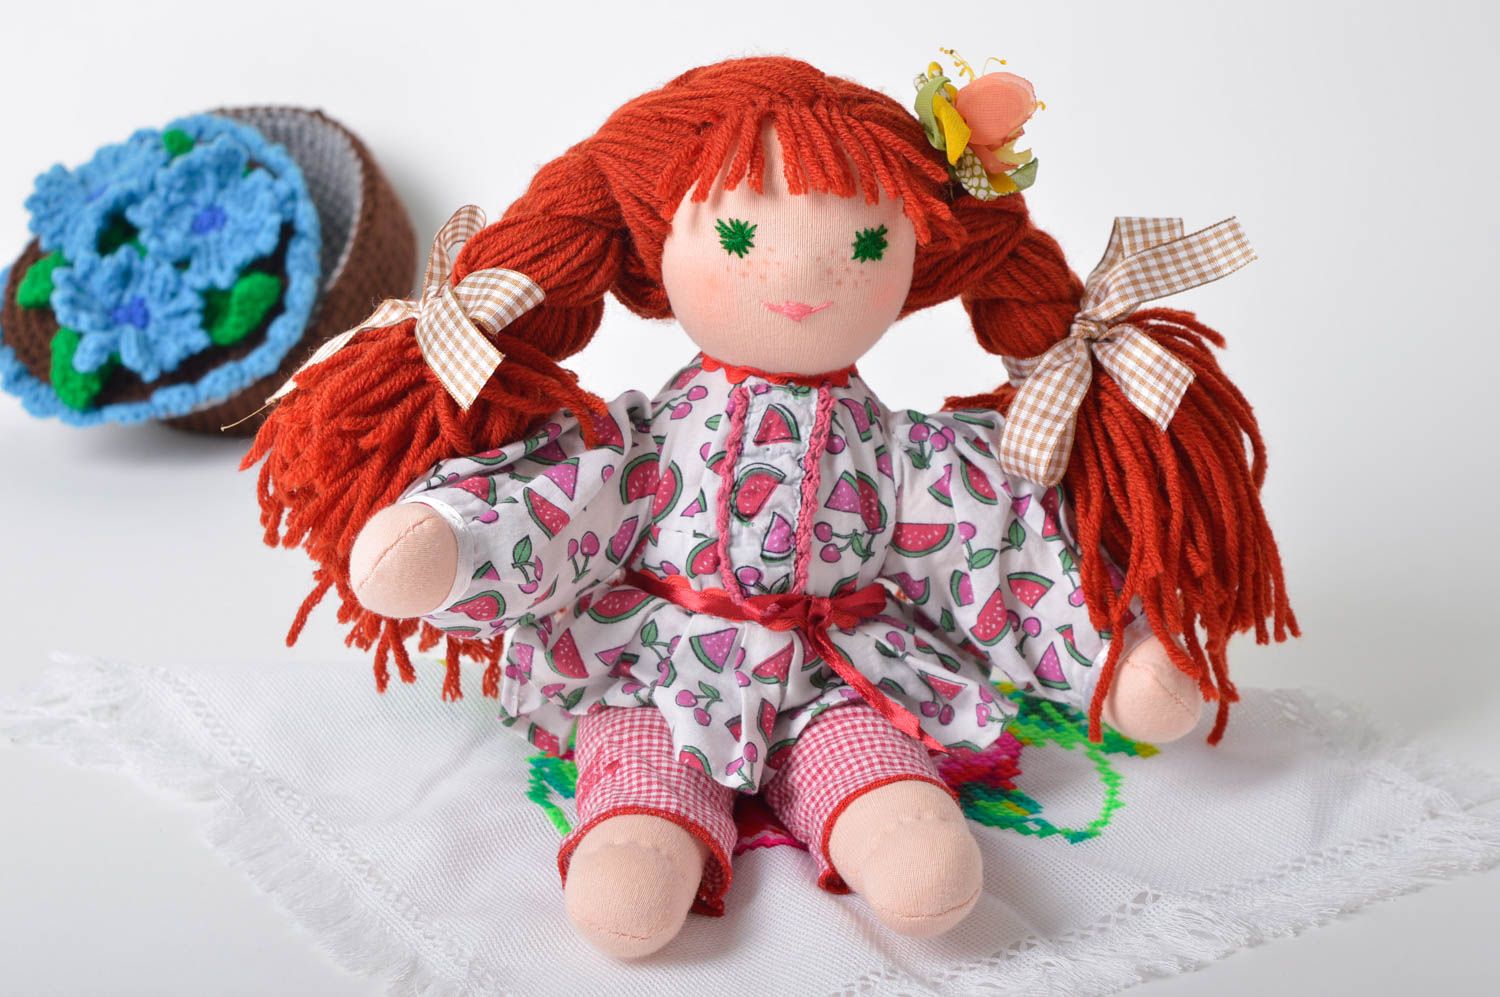 Handmade collectible doll fabric toy for children soft doll nursery decor ideas photo 1